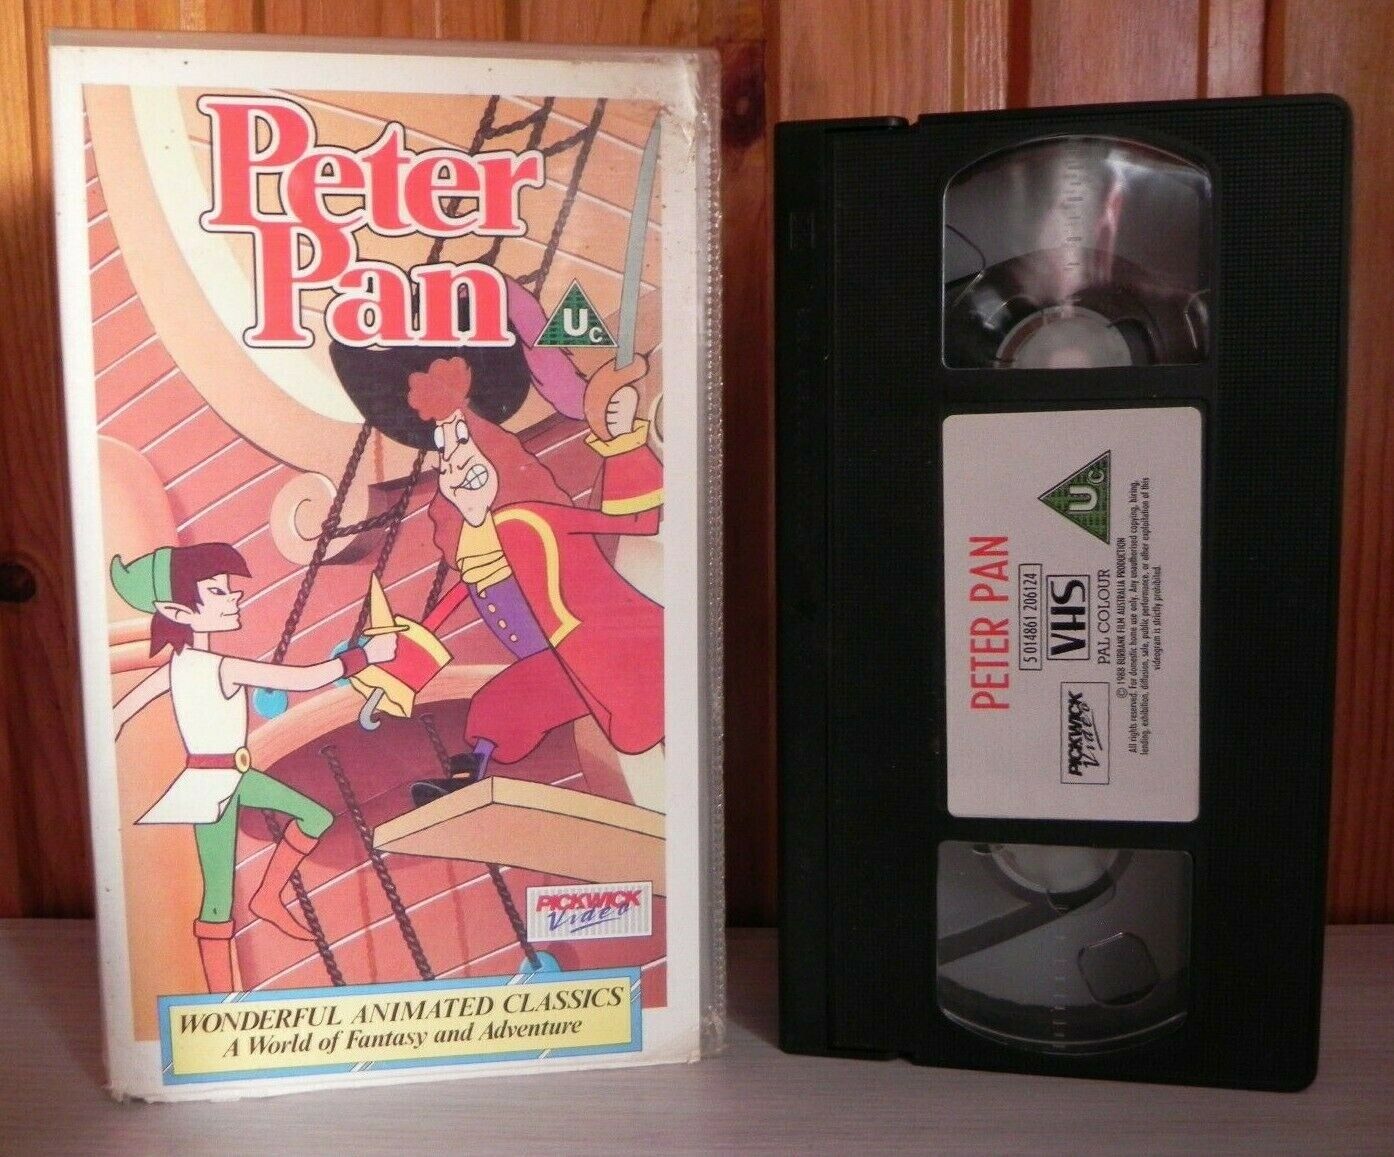 Peter Pan: Based On J.M. Barrie Classic Tale - Animated - Children's - Pal VHS-